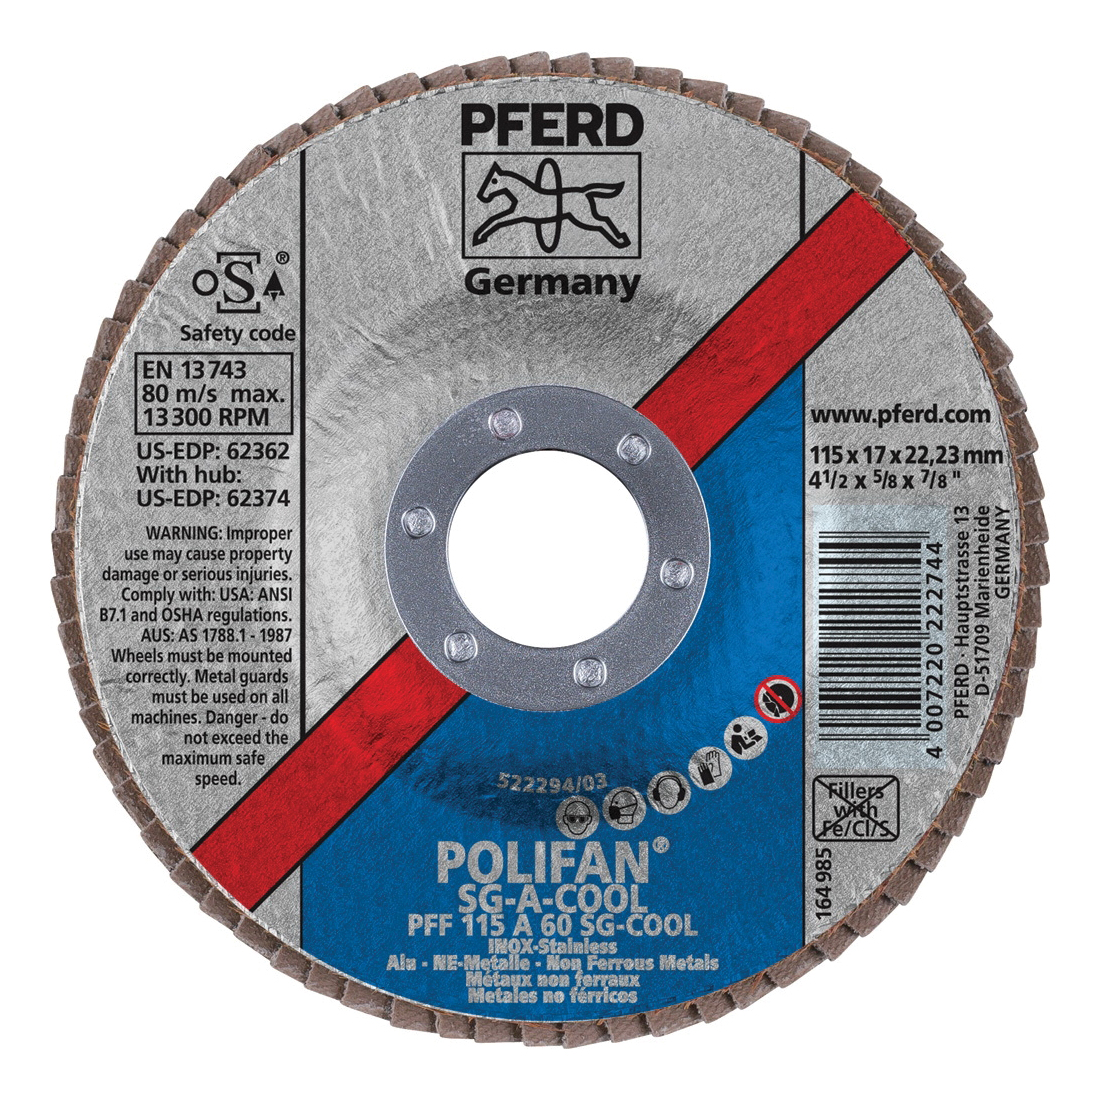 PFERD Polifan® 62362 Performance Line SG A-COOL Unthreaded Coated Abrasive Flap Disc, 4-1/2 in Dia, 7/8 in Center Hole, 60 Grit, Aluminum Oxide Abrasive, Type 27 Flat Disc